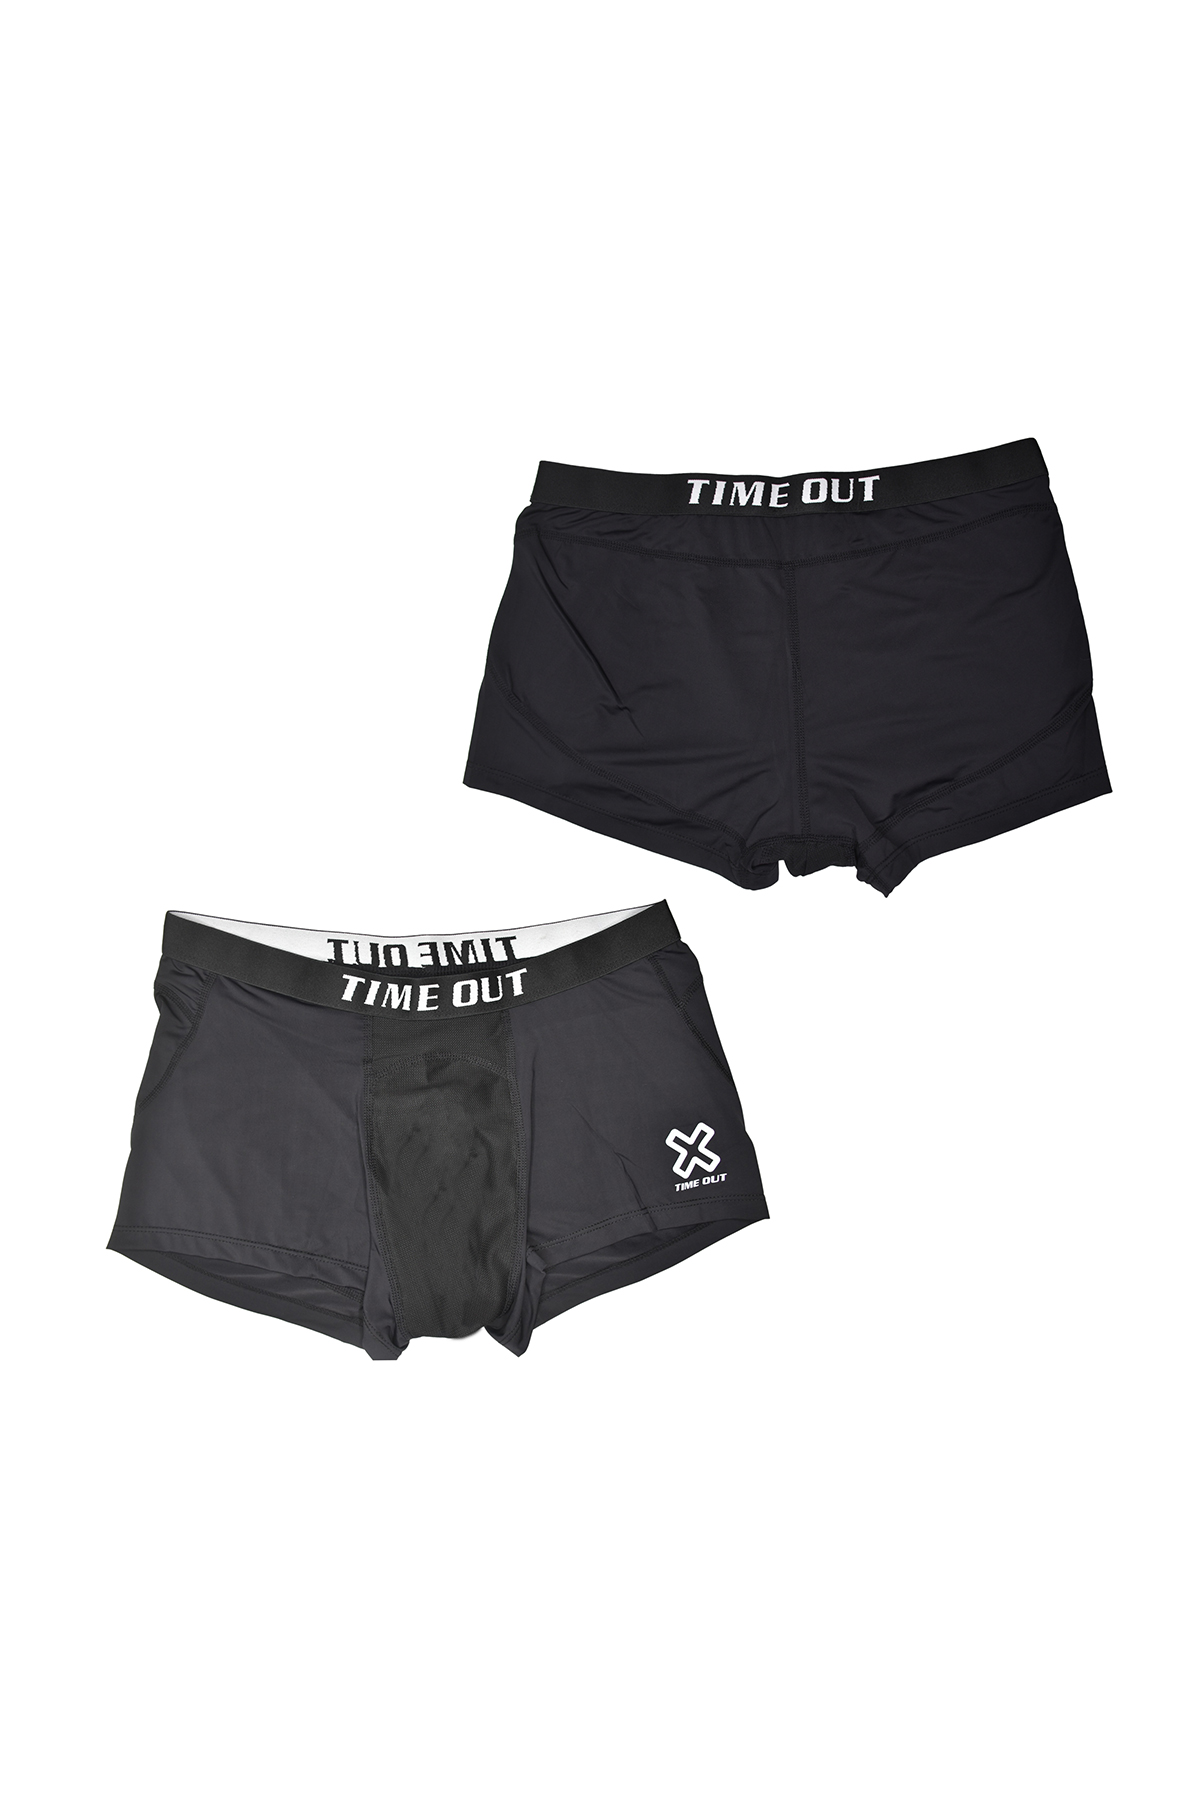 Time-Out-X-Men’s-Activewear-Boxers—Black—Front-and-Back